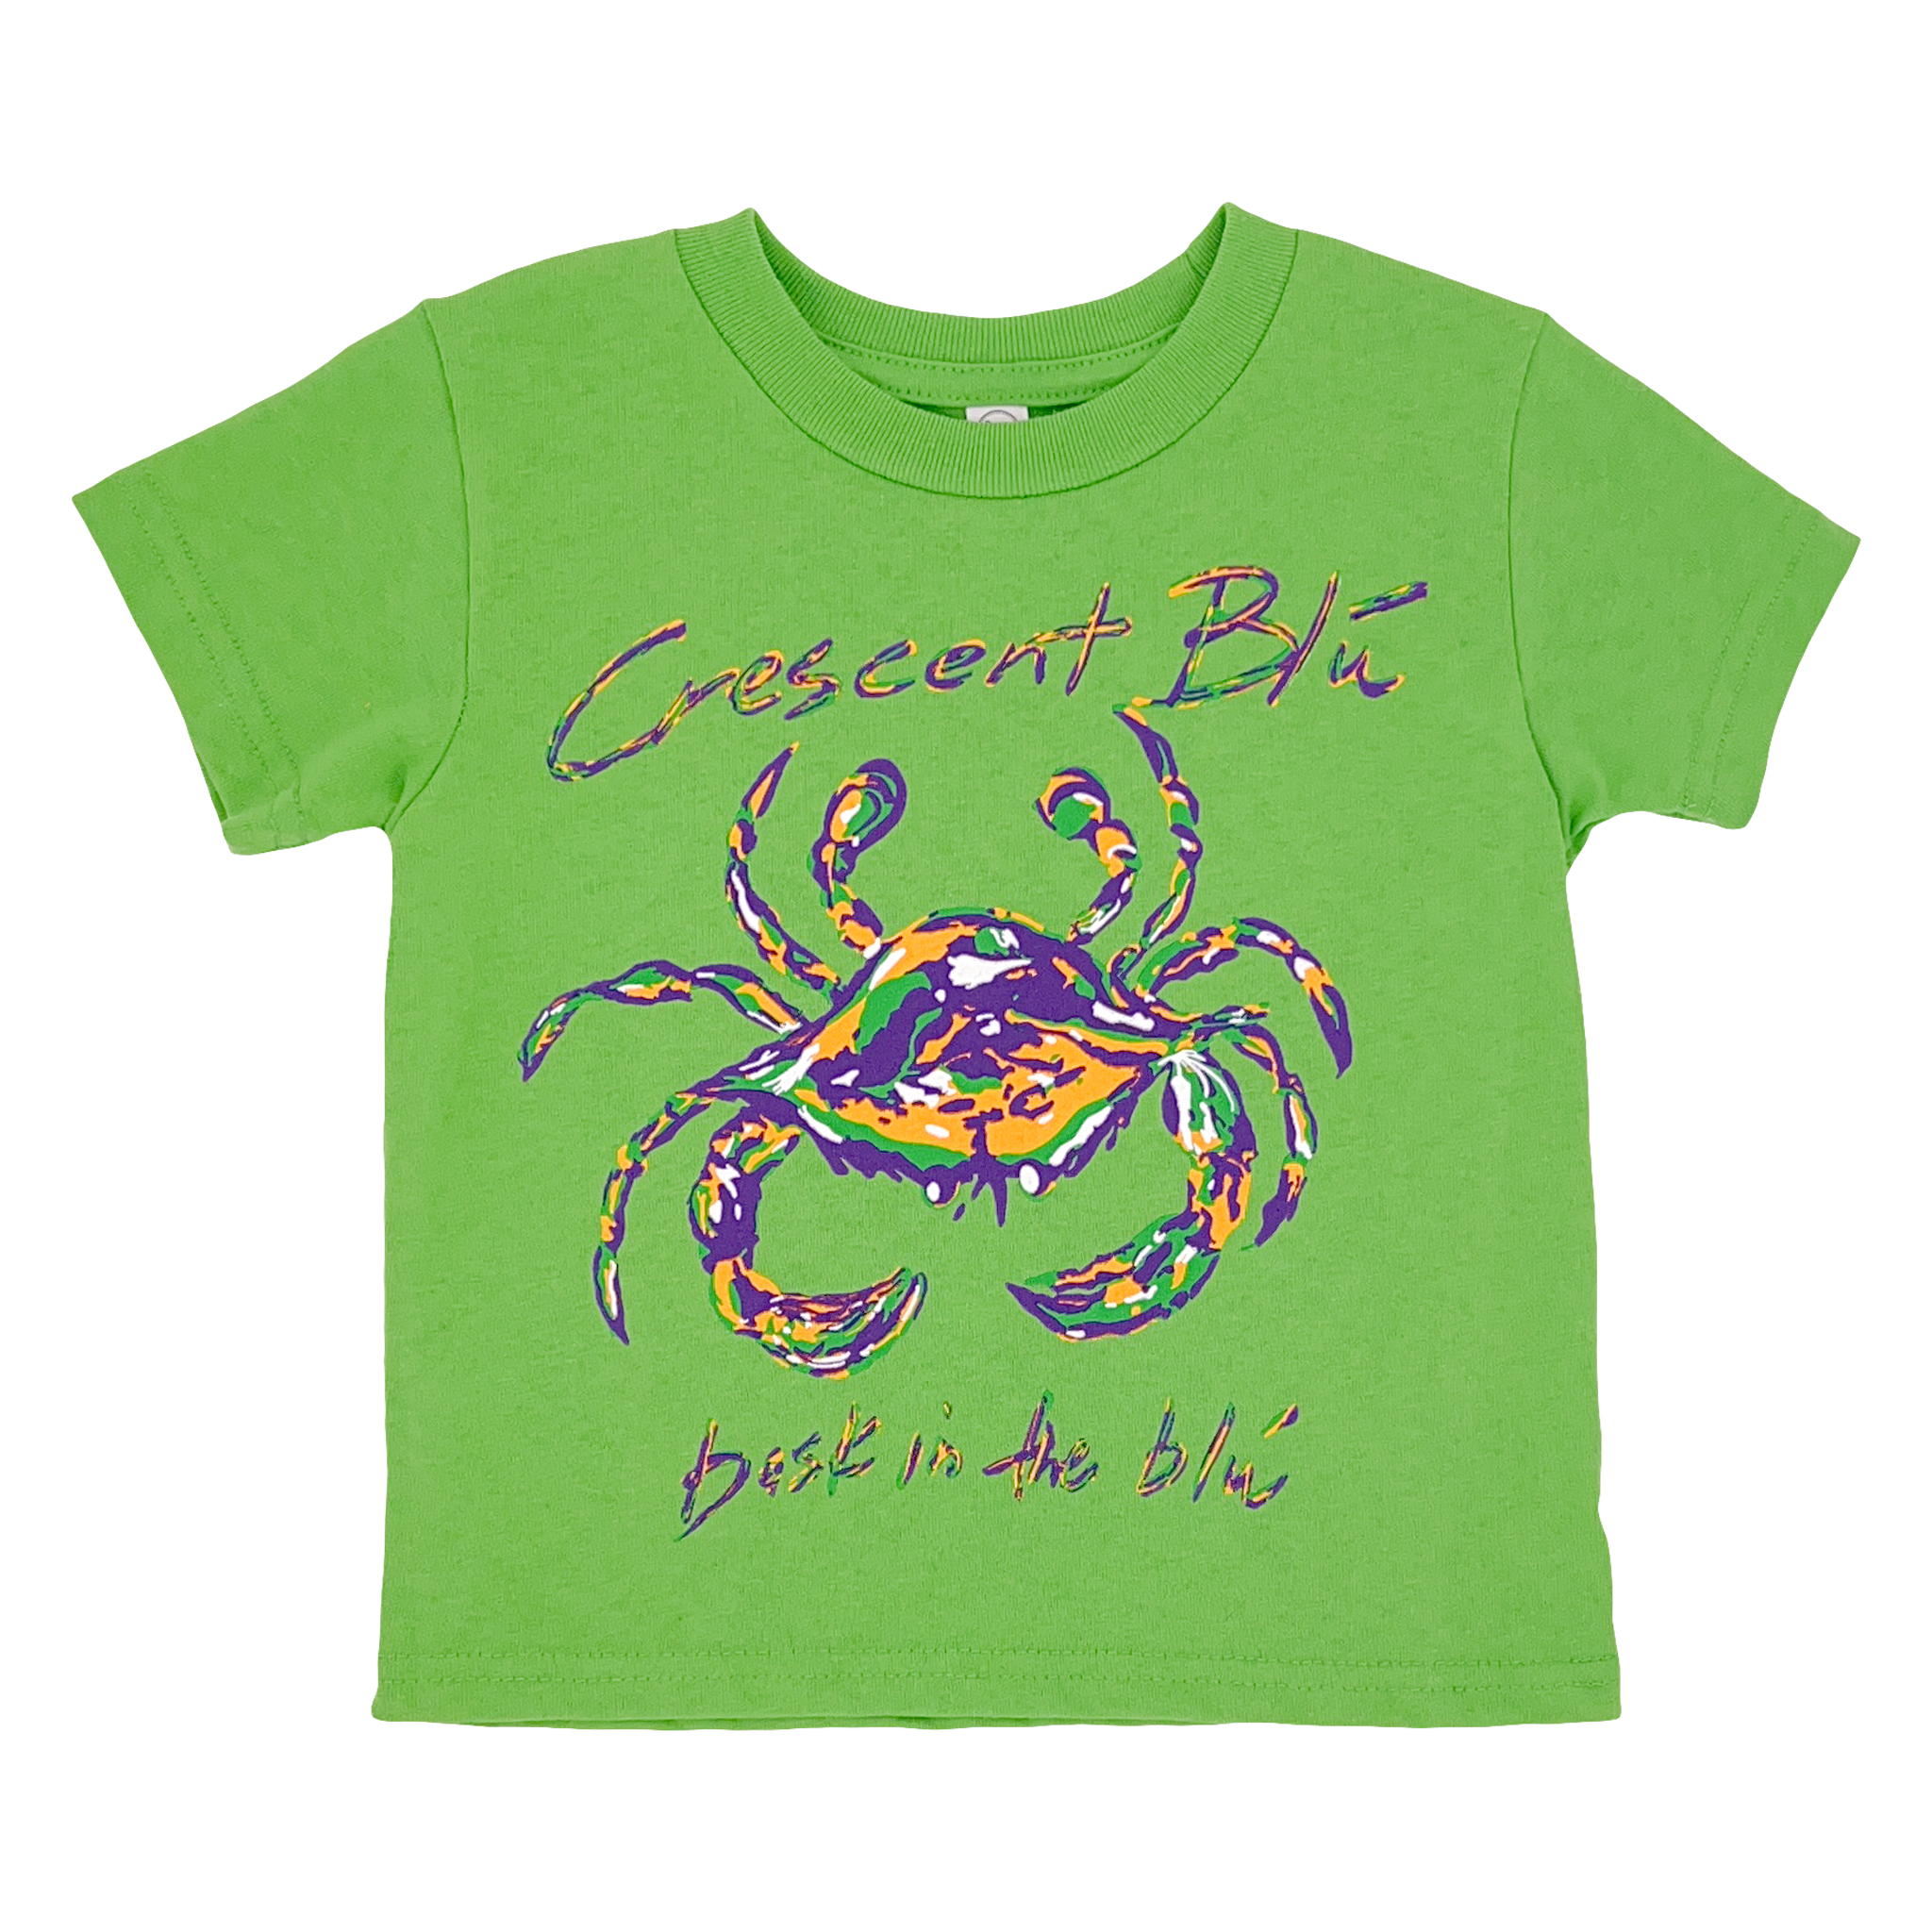 A green apple colored toddler short sleeve t-shirt with a Mardi Gras crab on the front. Crescent Blú is written about the crab, Bask in the Blu is written below the crab.